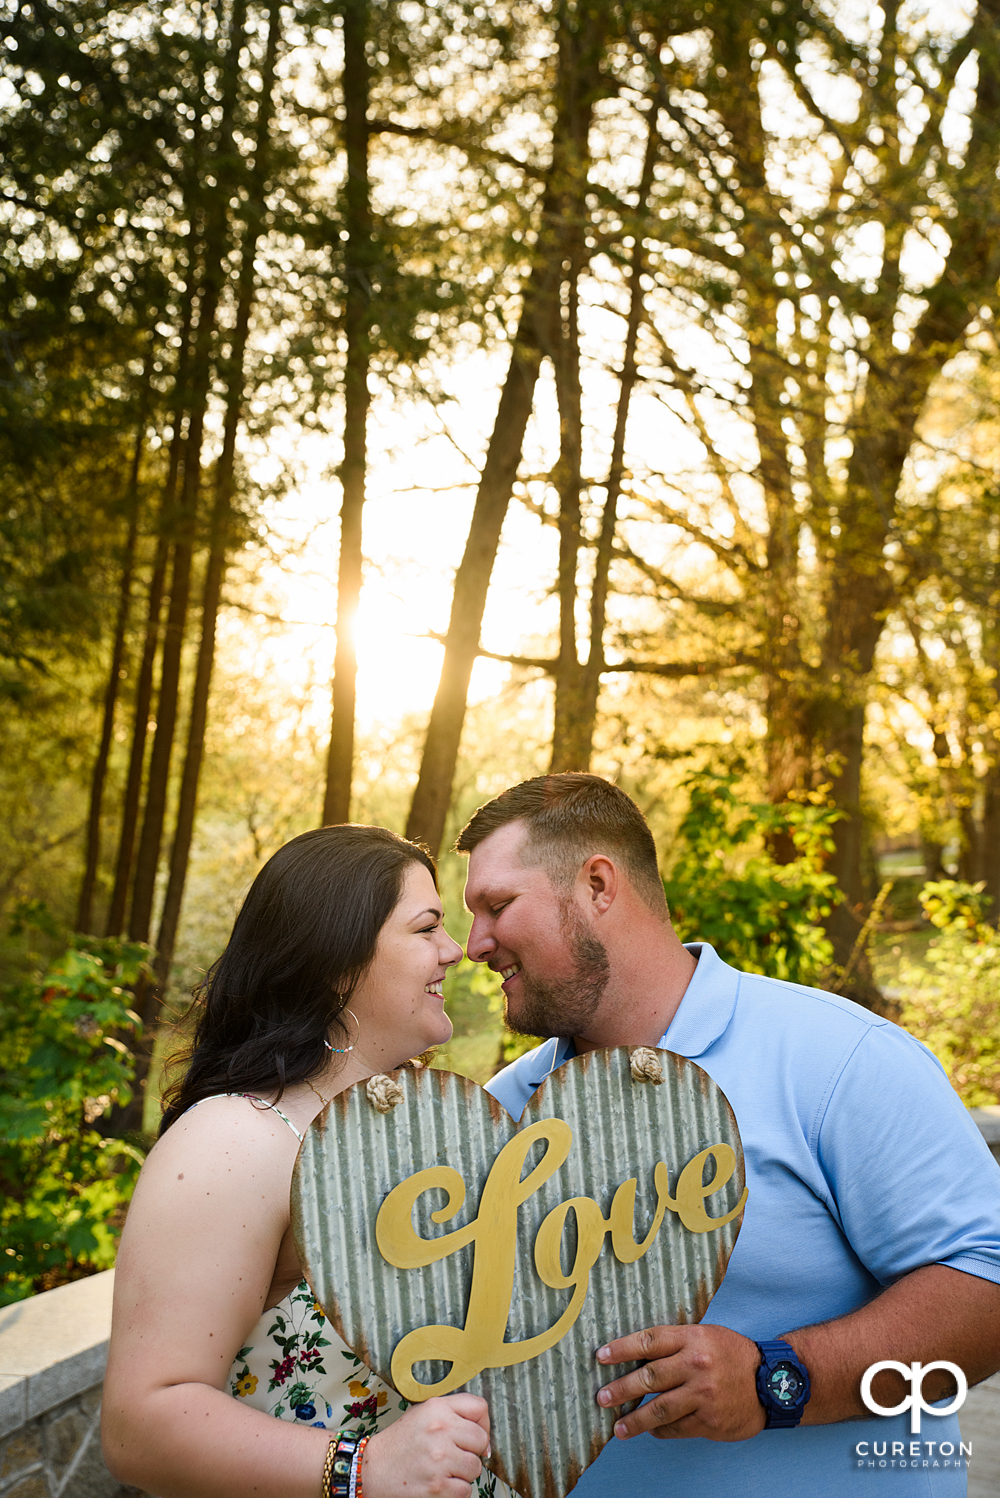 Engagement session at Cleveland Park in downtown Greenville,SC.